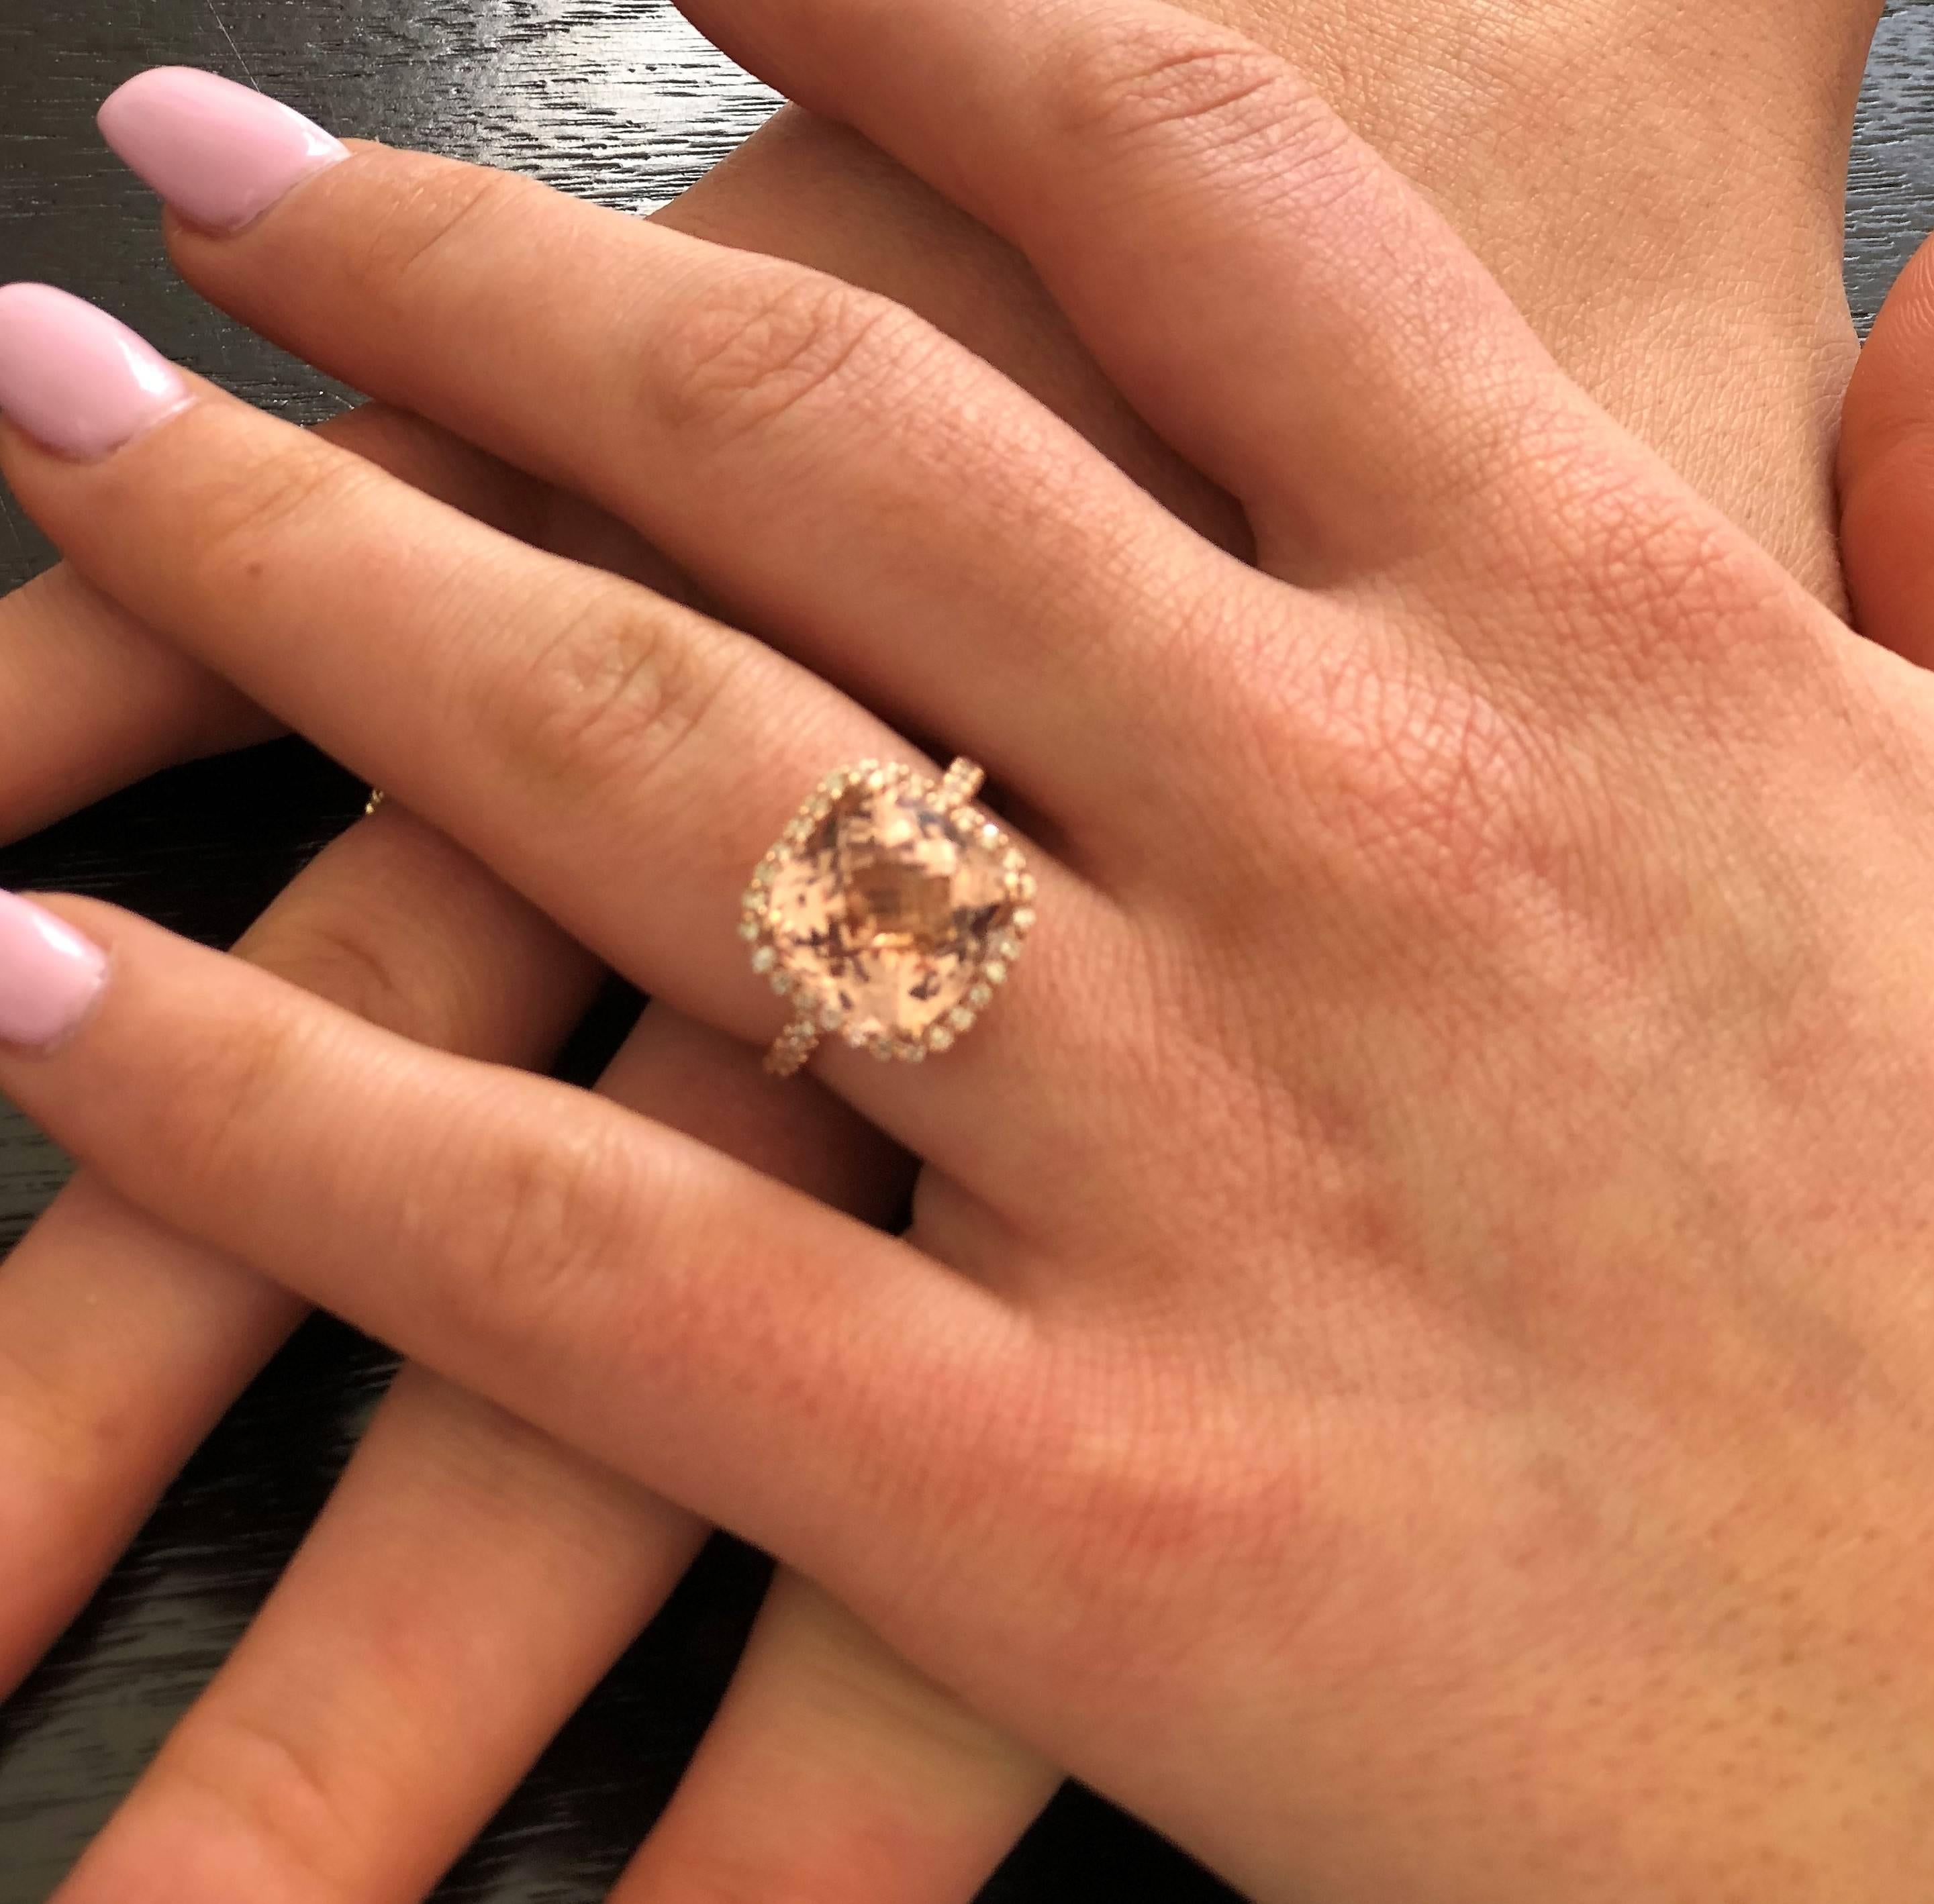 18k karat rose gold cocktail ring 
Featuring six carat cushion shape morganite 
Surrounded by  pave set diamonds weighing 0.64 carat
Ring finger size 6 In Stock
New Ring
Ring can be resized
Handmade in the USA
Our team of graduate gemologists